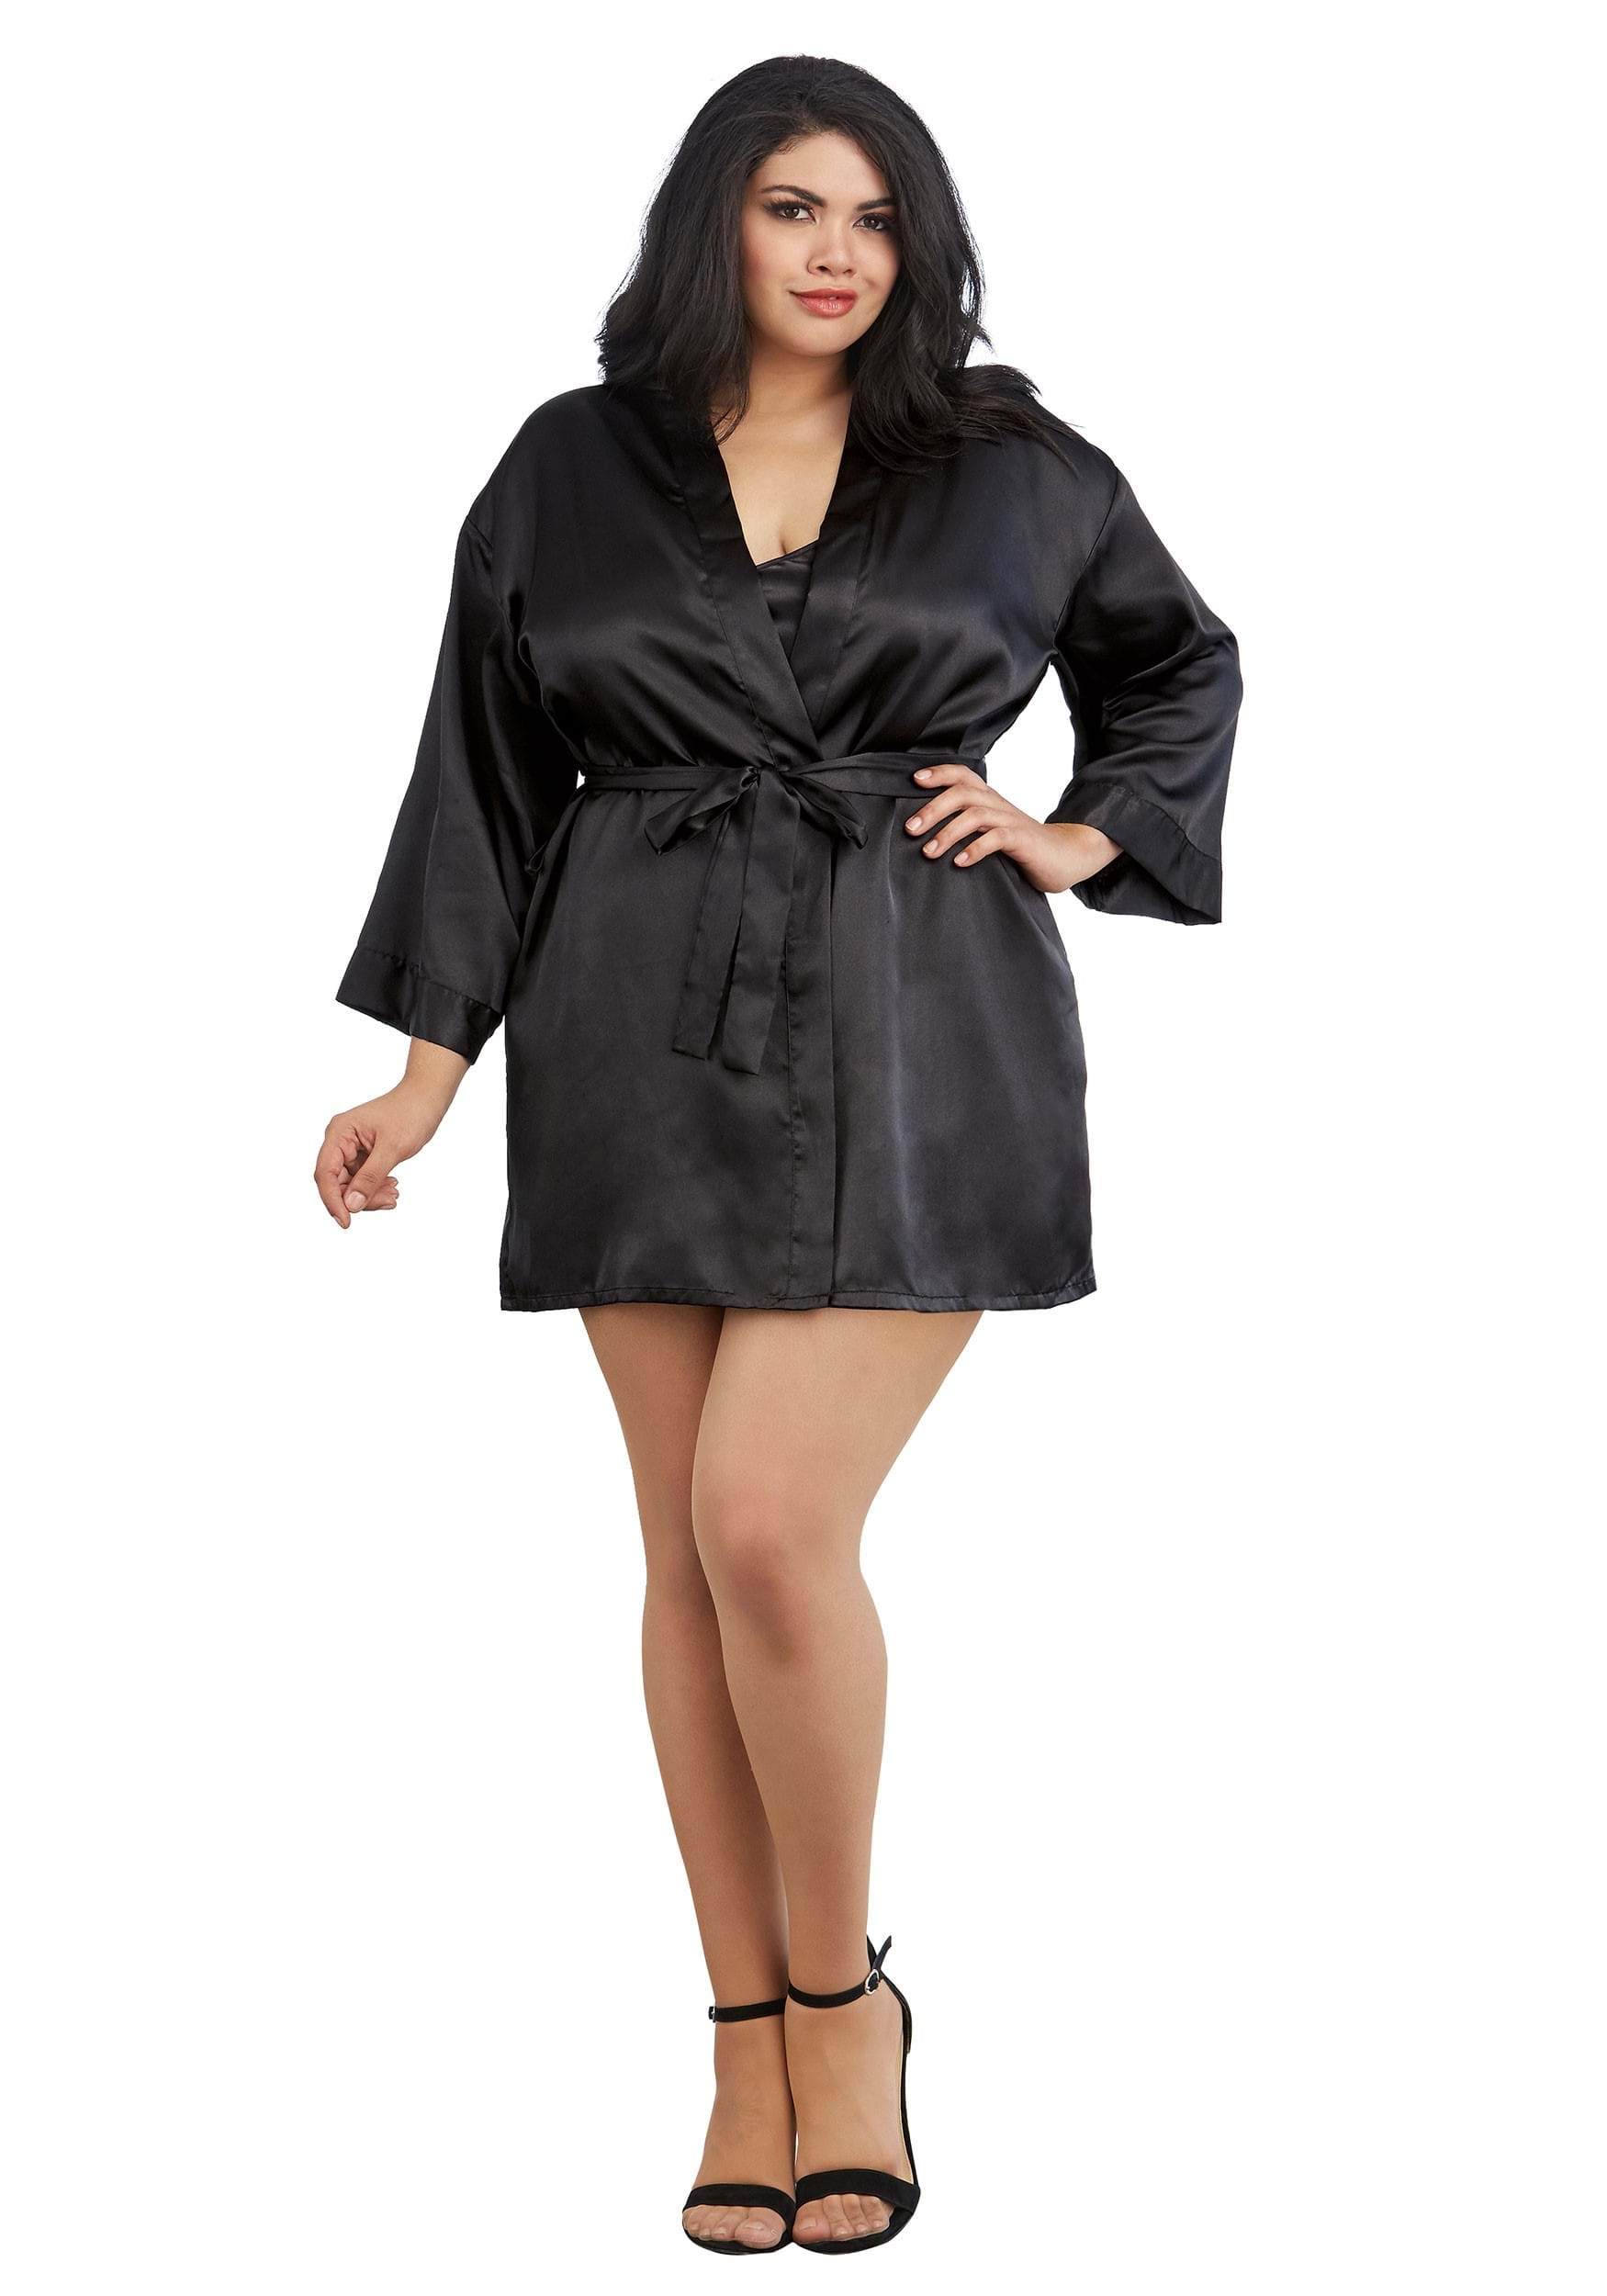 Plus Size Women's Black Charmeuse Chemise And Robe , Adult Lingerie